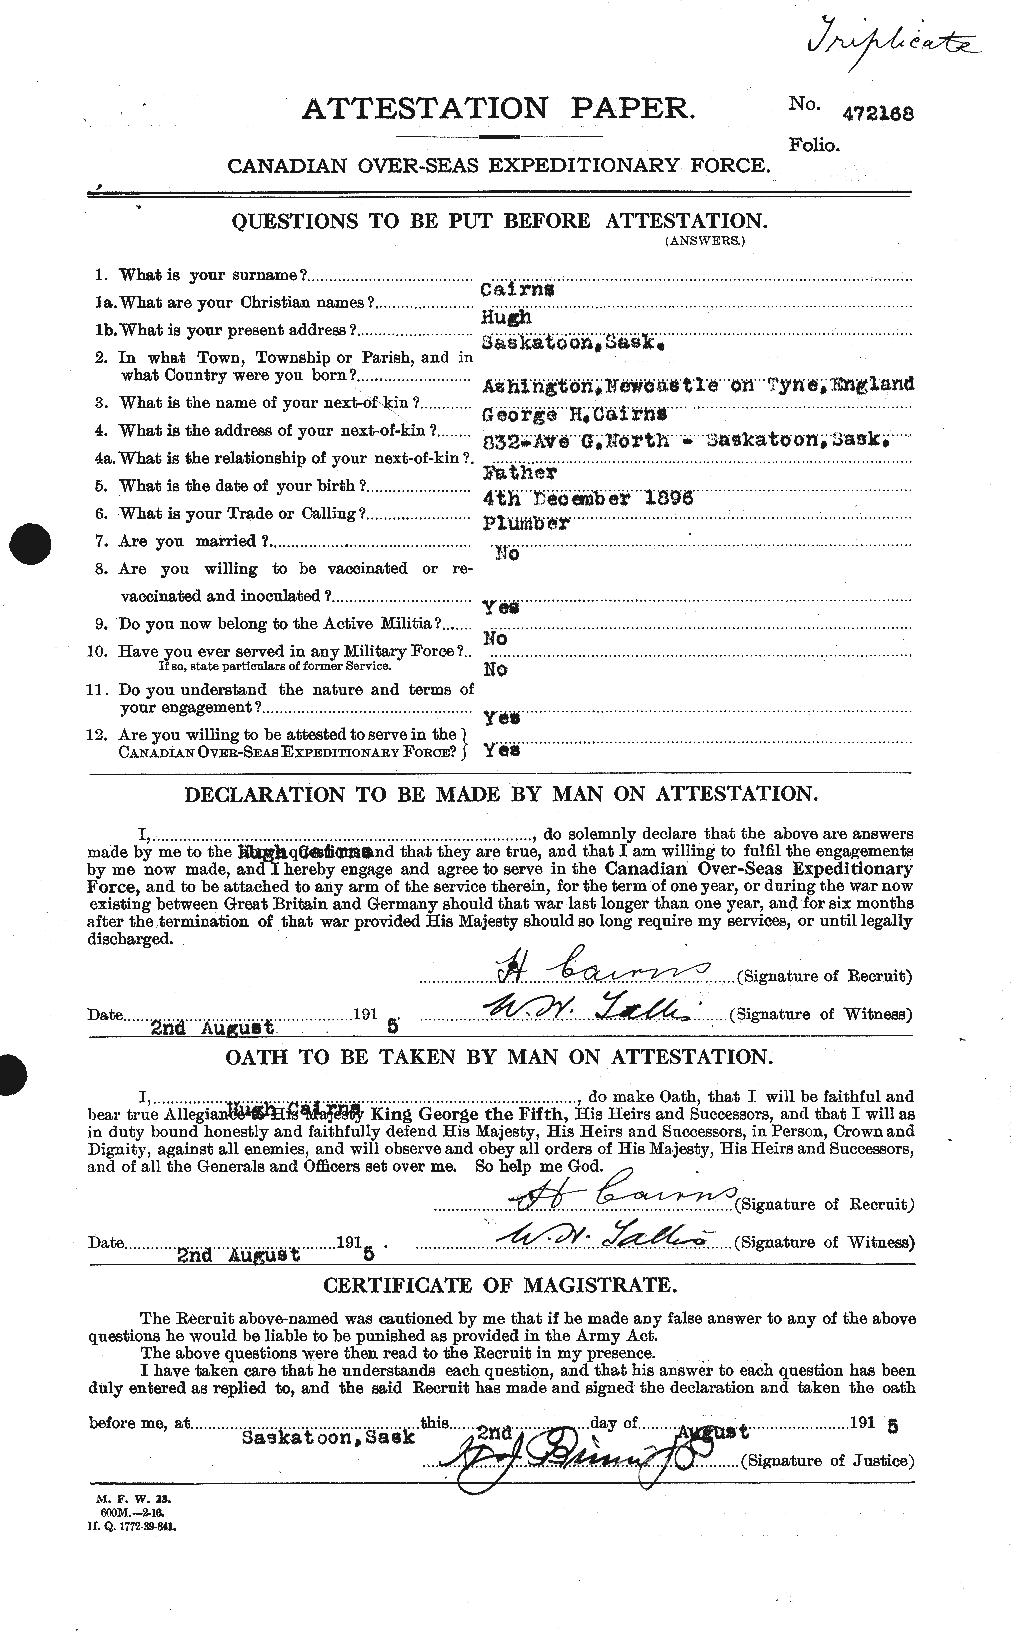 Personnel Records of the First World War - CEF 206302a